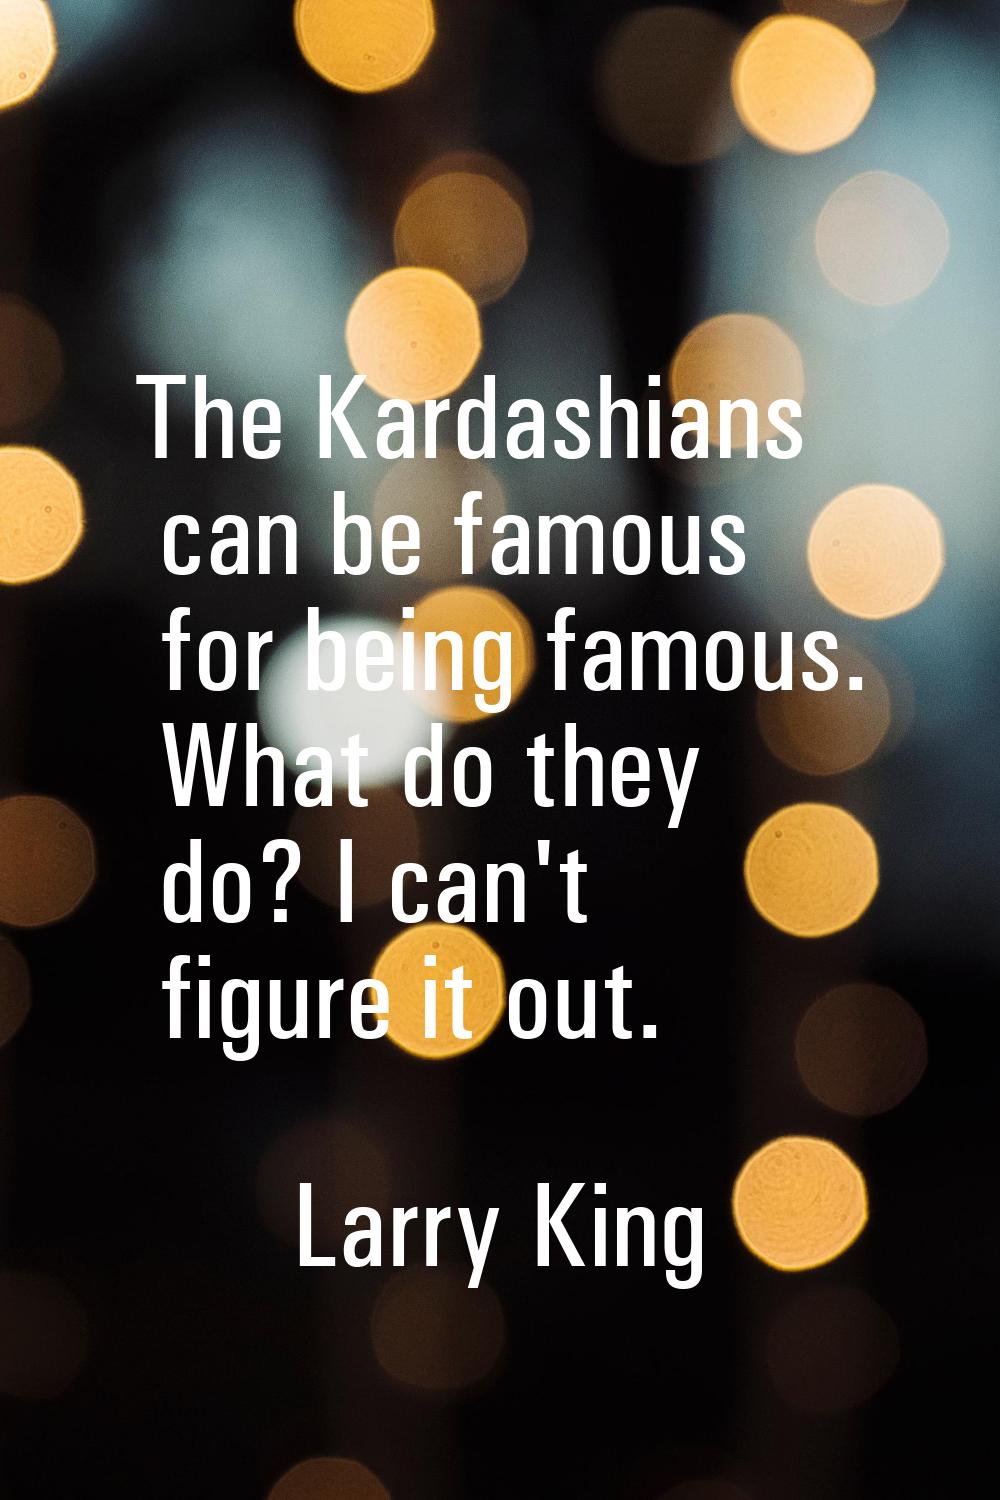 The Kardashians can be famous for being famous. What do they do? I can't figure it out.